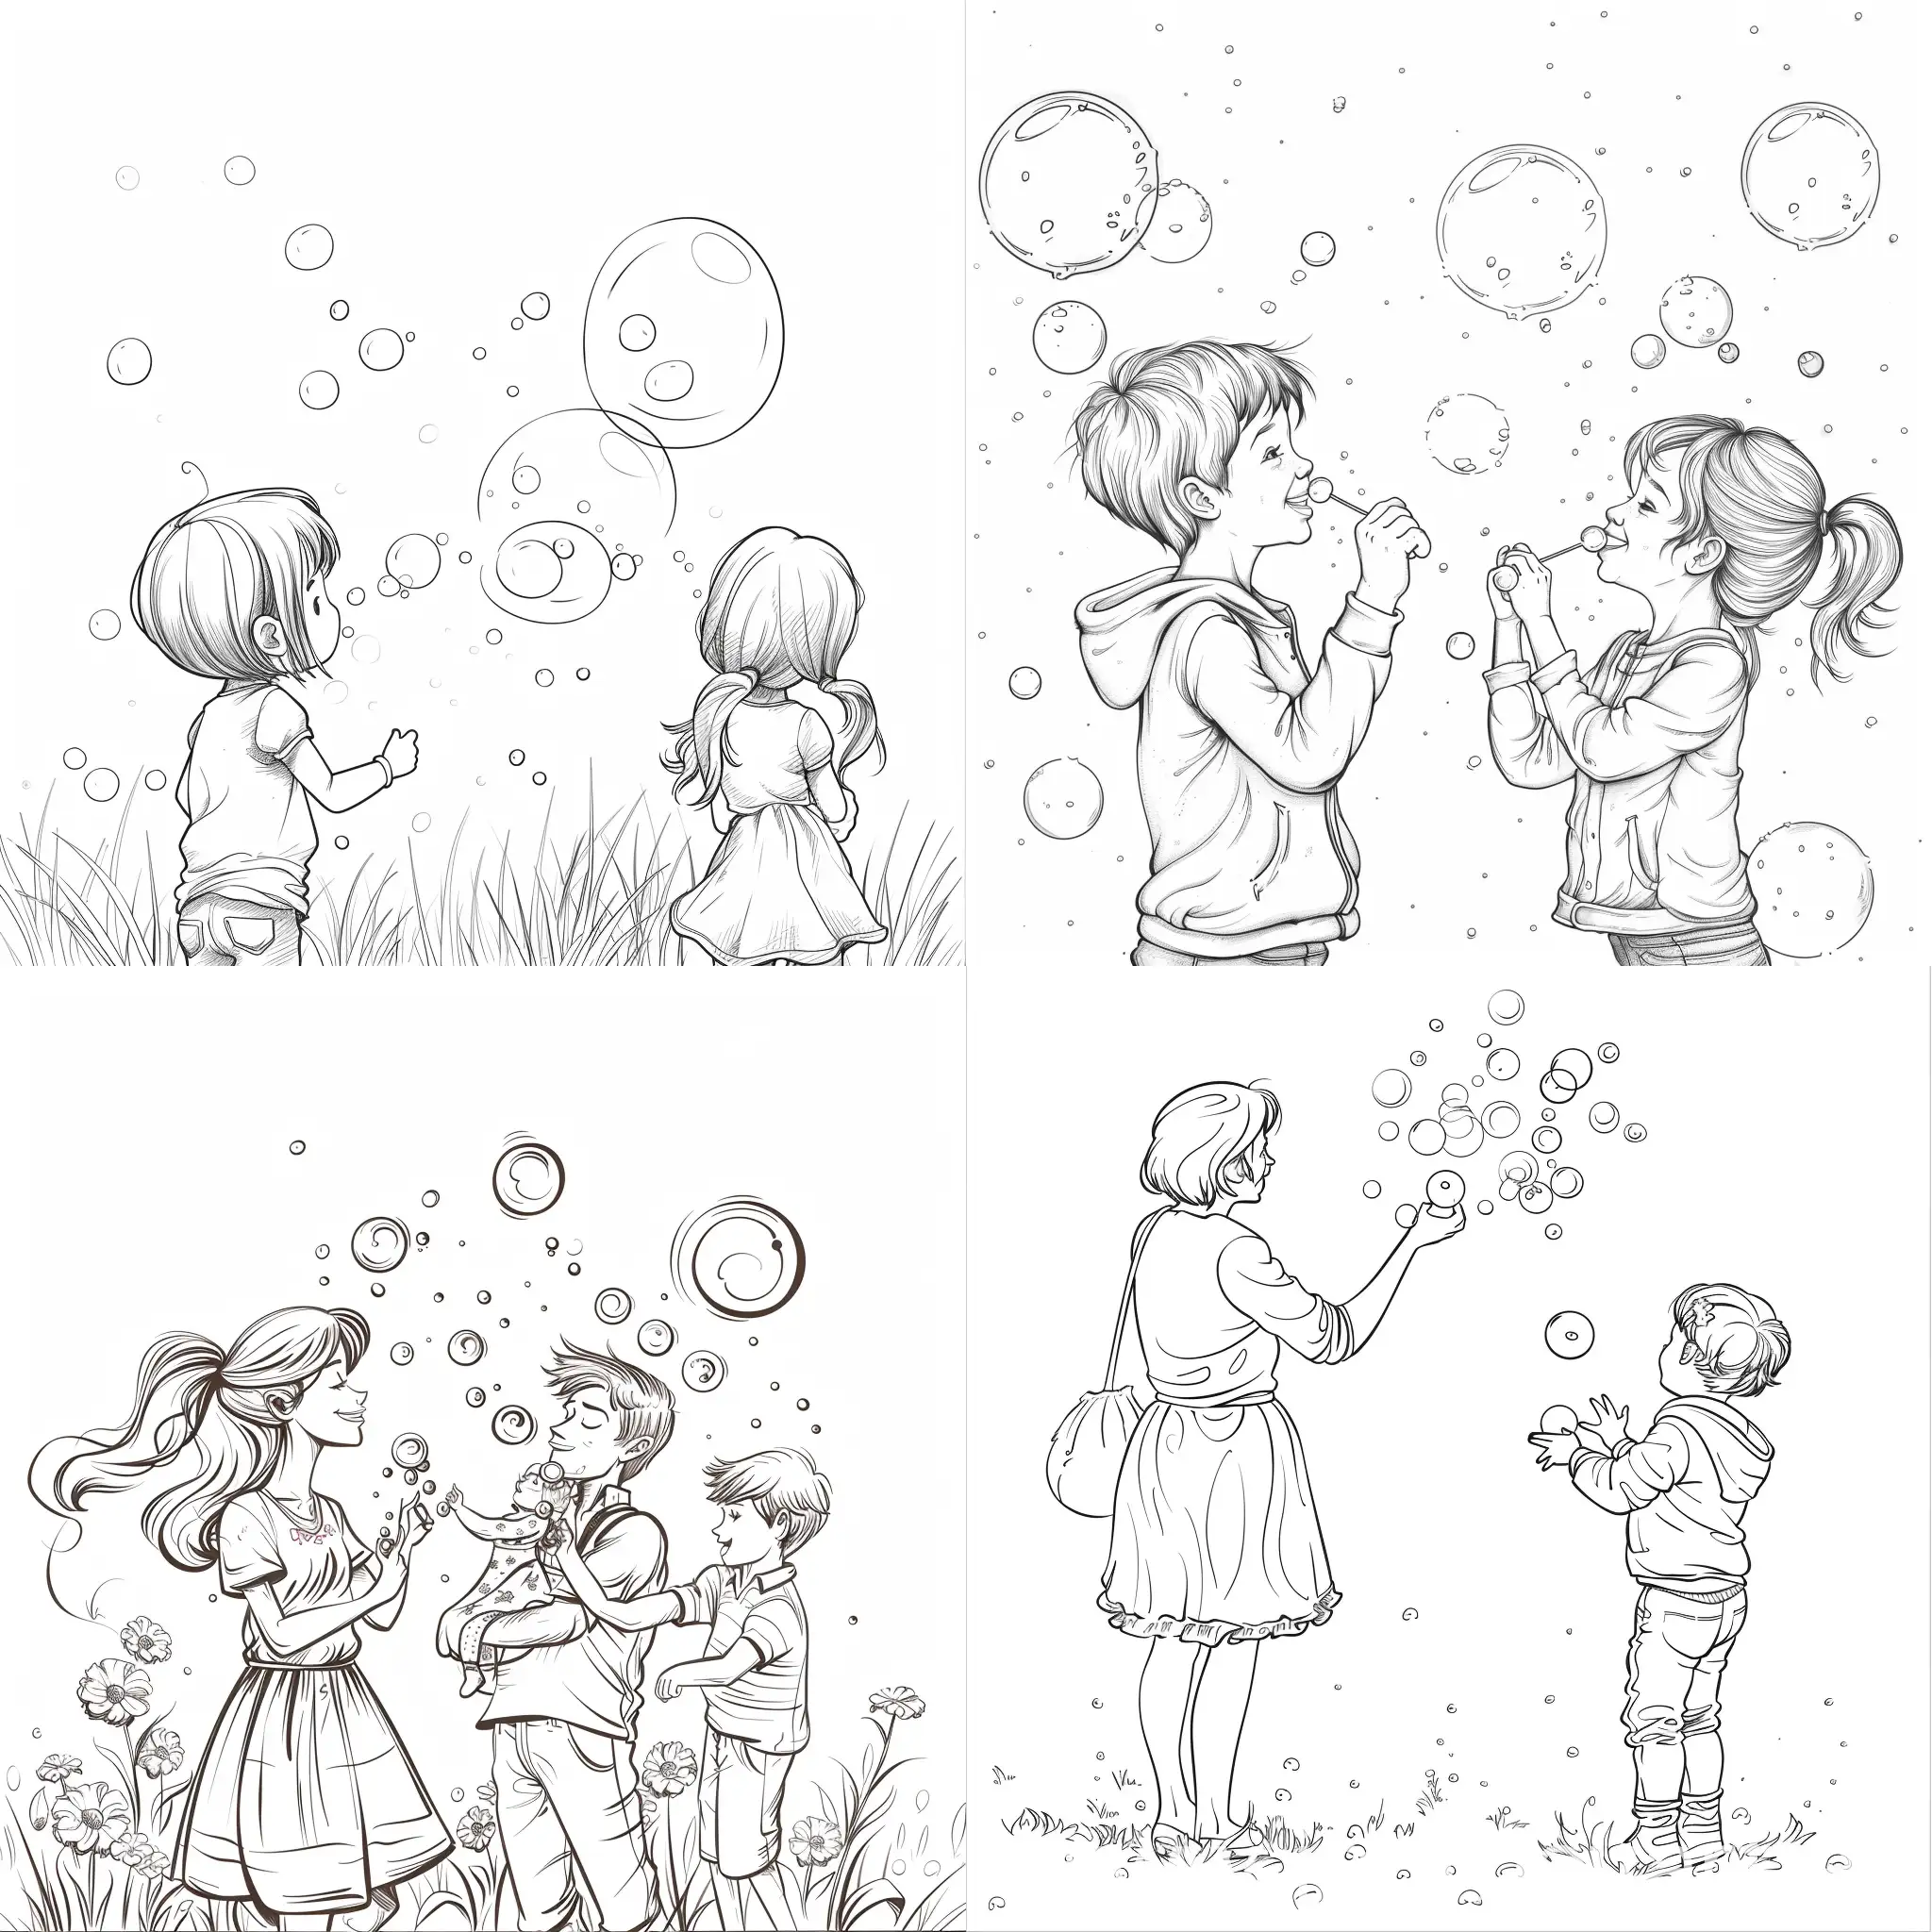  b/w outline art for kids coloring book page family love themed coloring pages, Blowing bubbles outside. full body, full white, kids style, white, white background, whole body, sketch style, full body ((( white background ))), use outline., cartoon style, line art, coloring book, clean line art. sketch style, line - art.